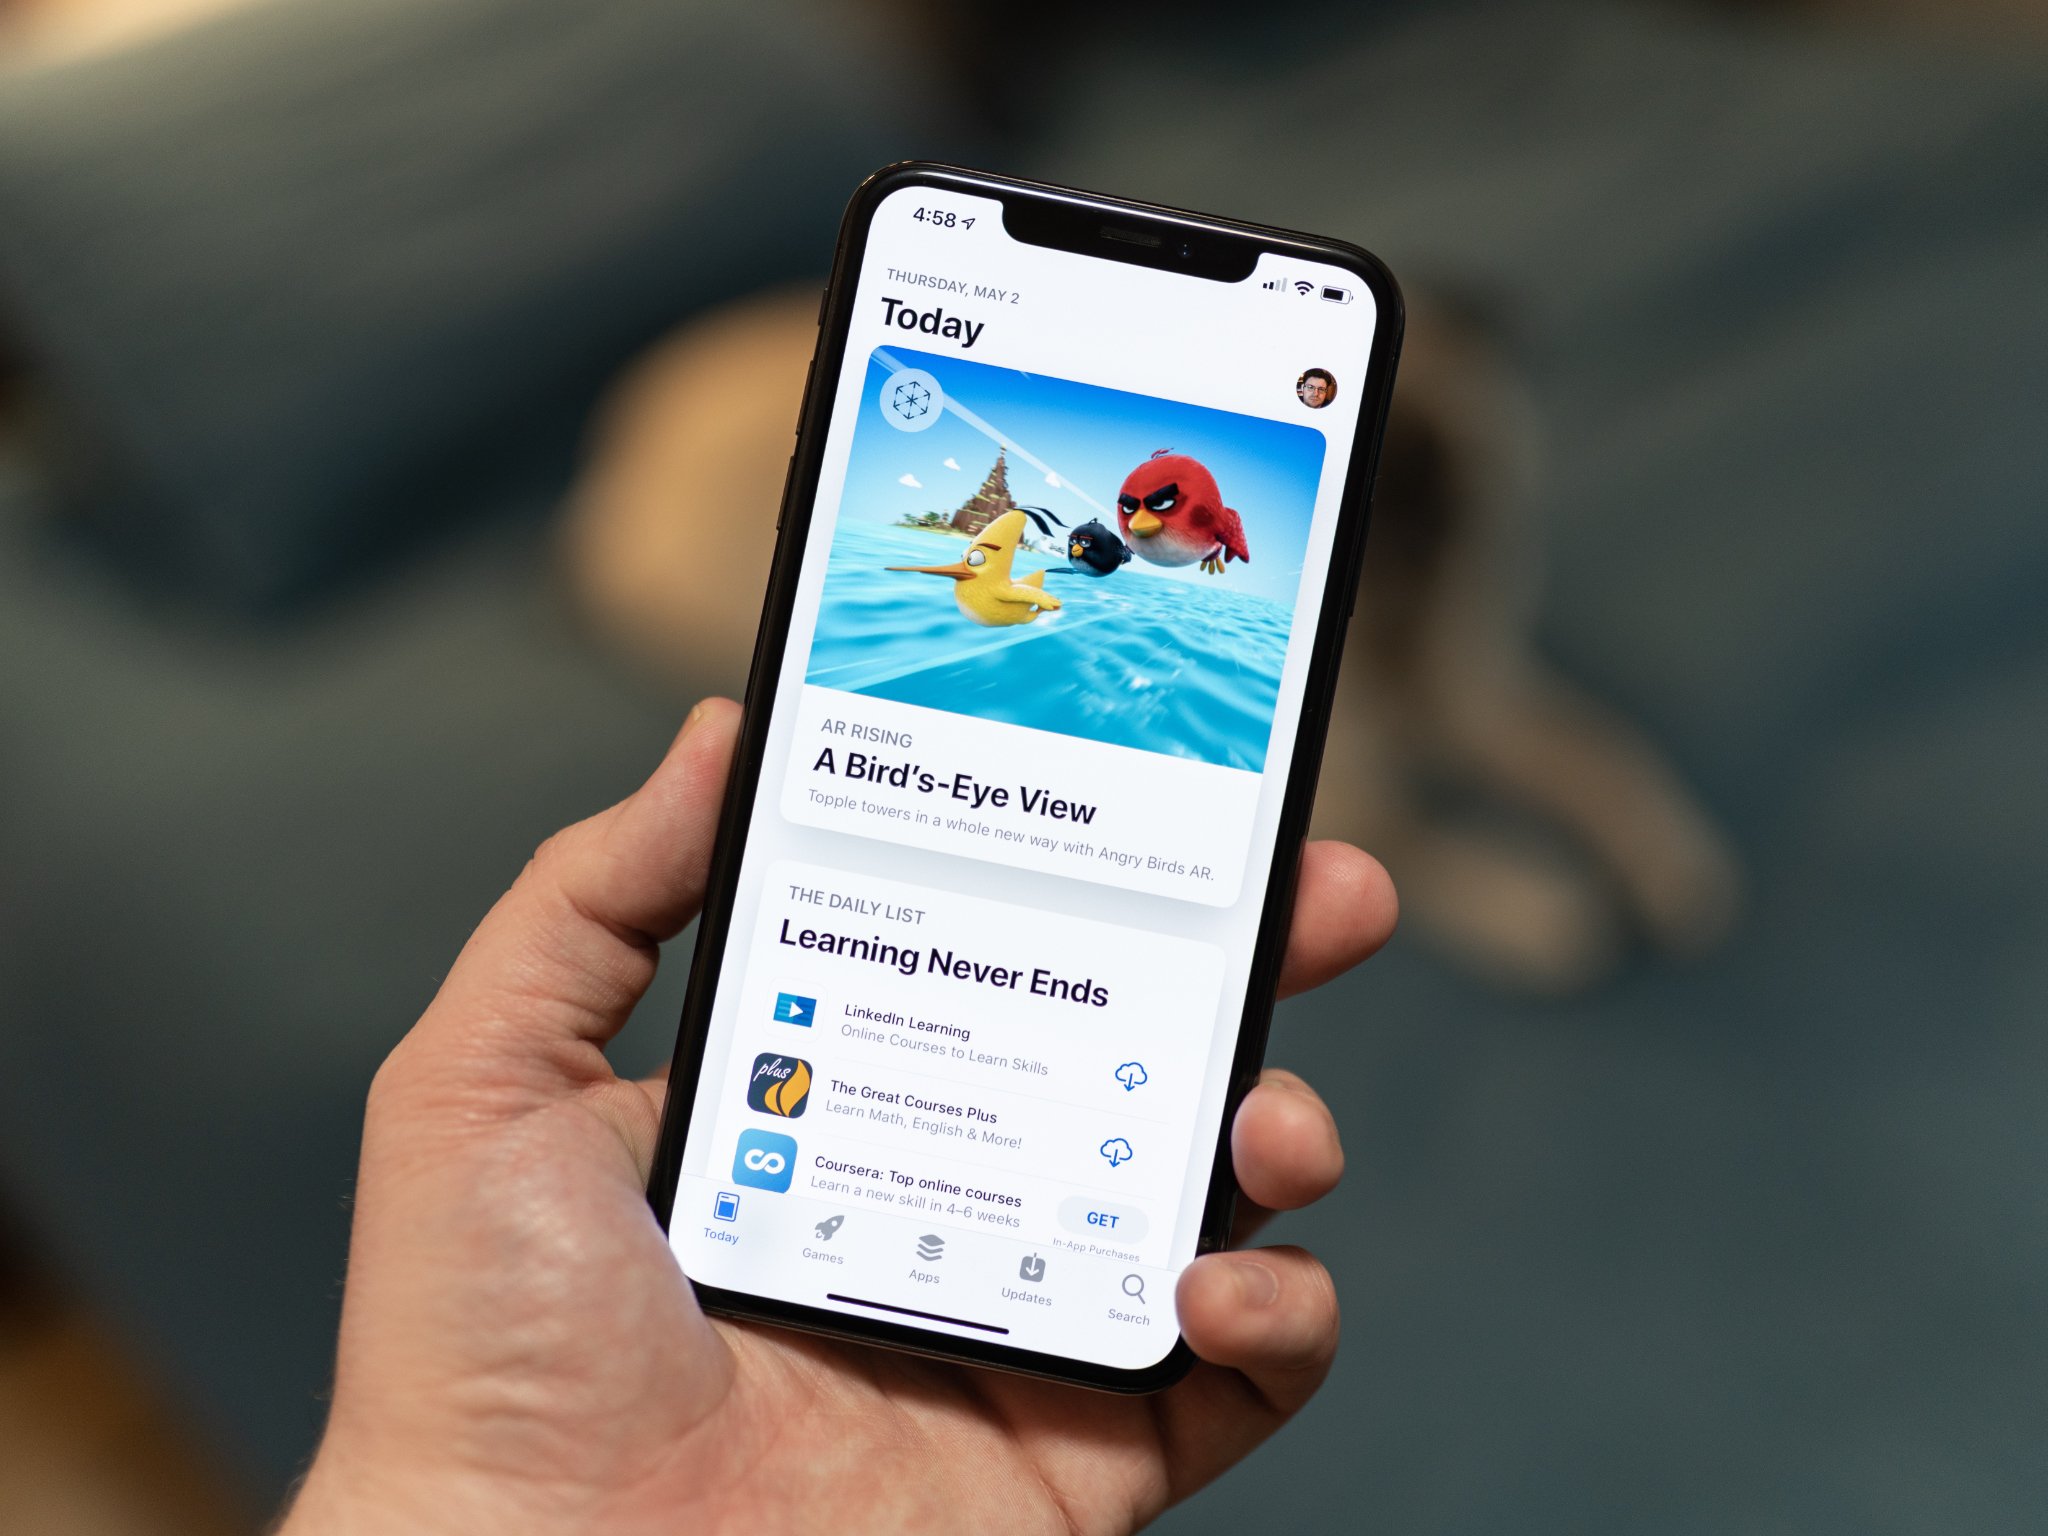 How to share content in the App Store